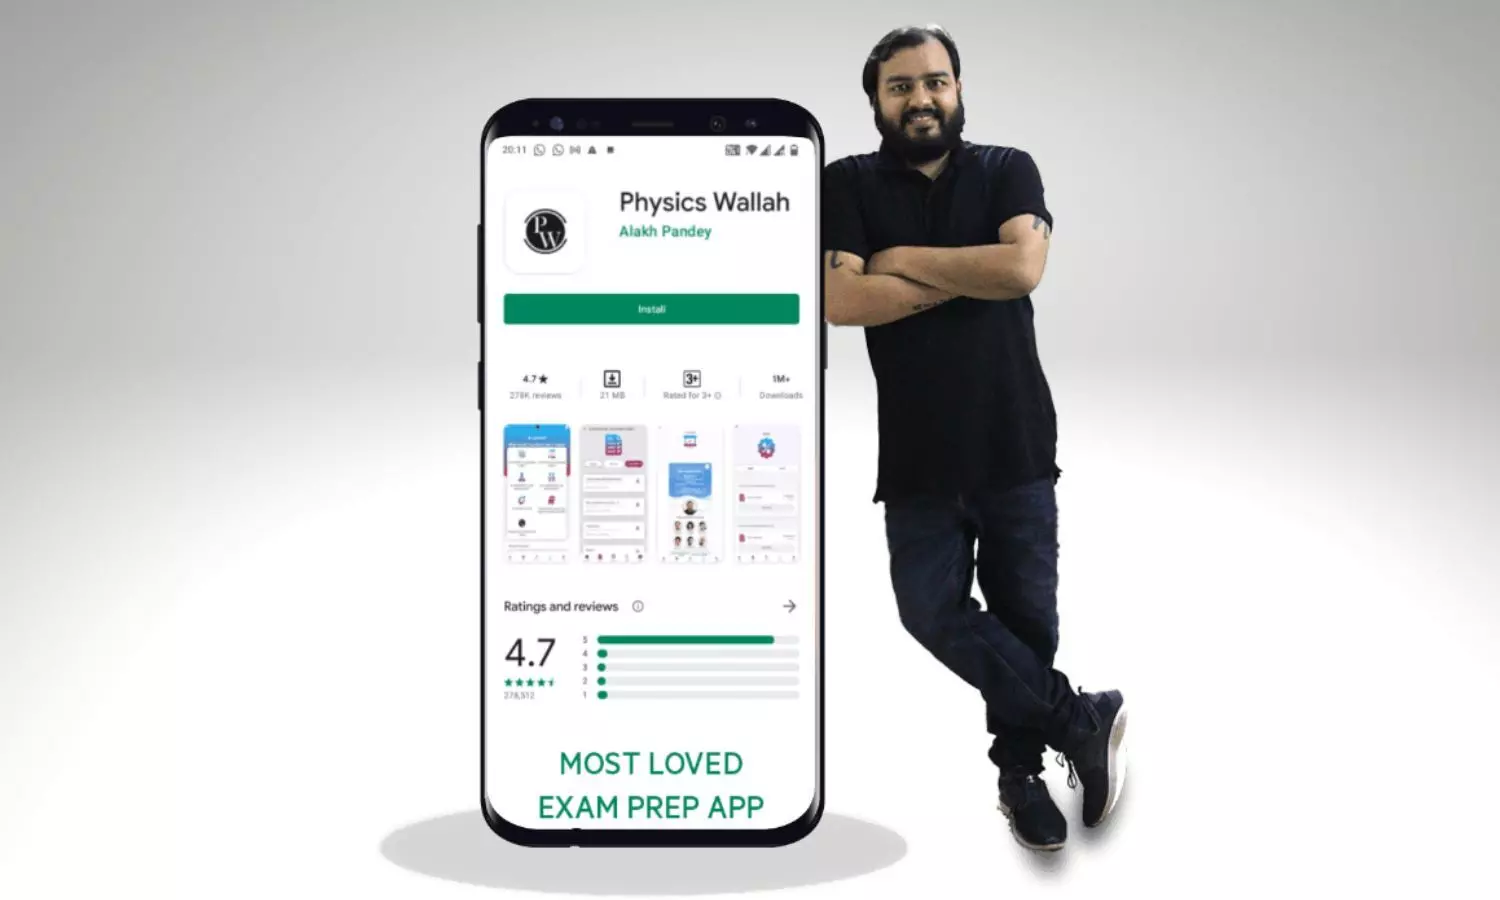 physicswallah indias first profitable edtech startup Alakh Pandey success story